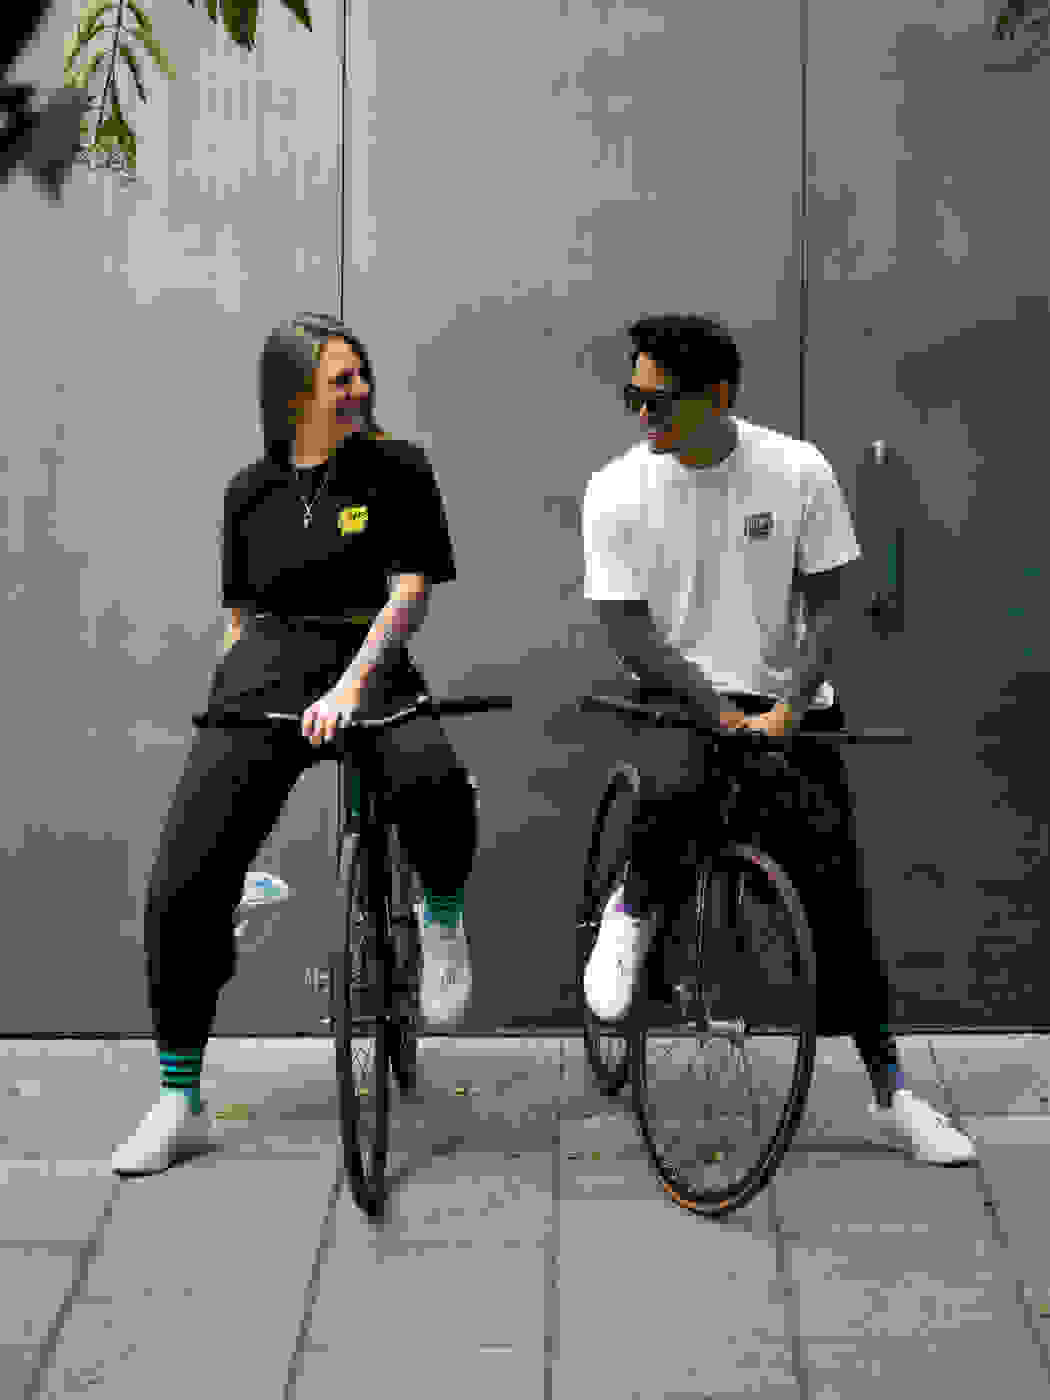 Two people sat on bicycles in front of a green door